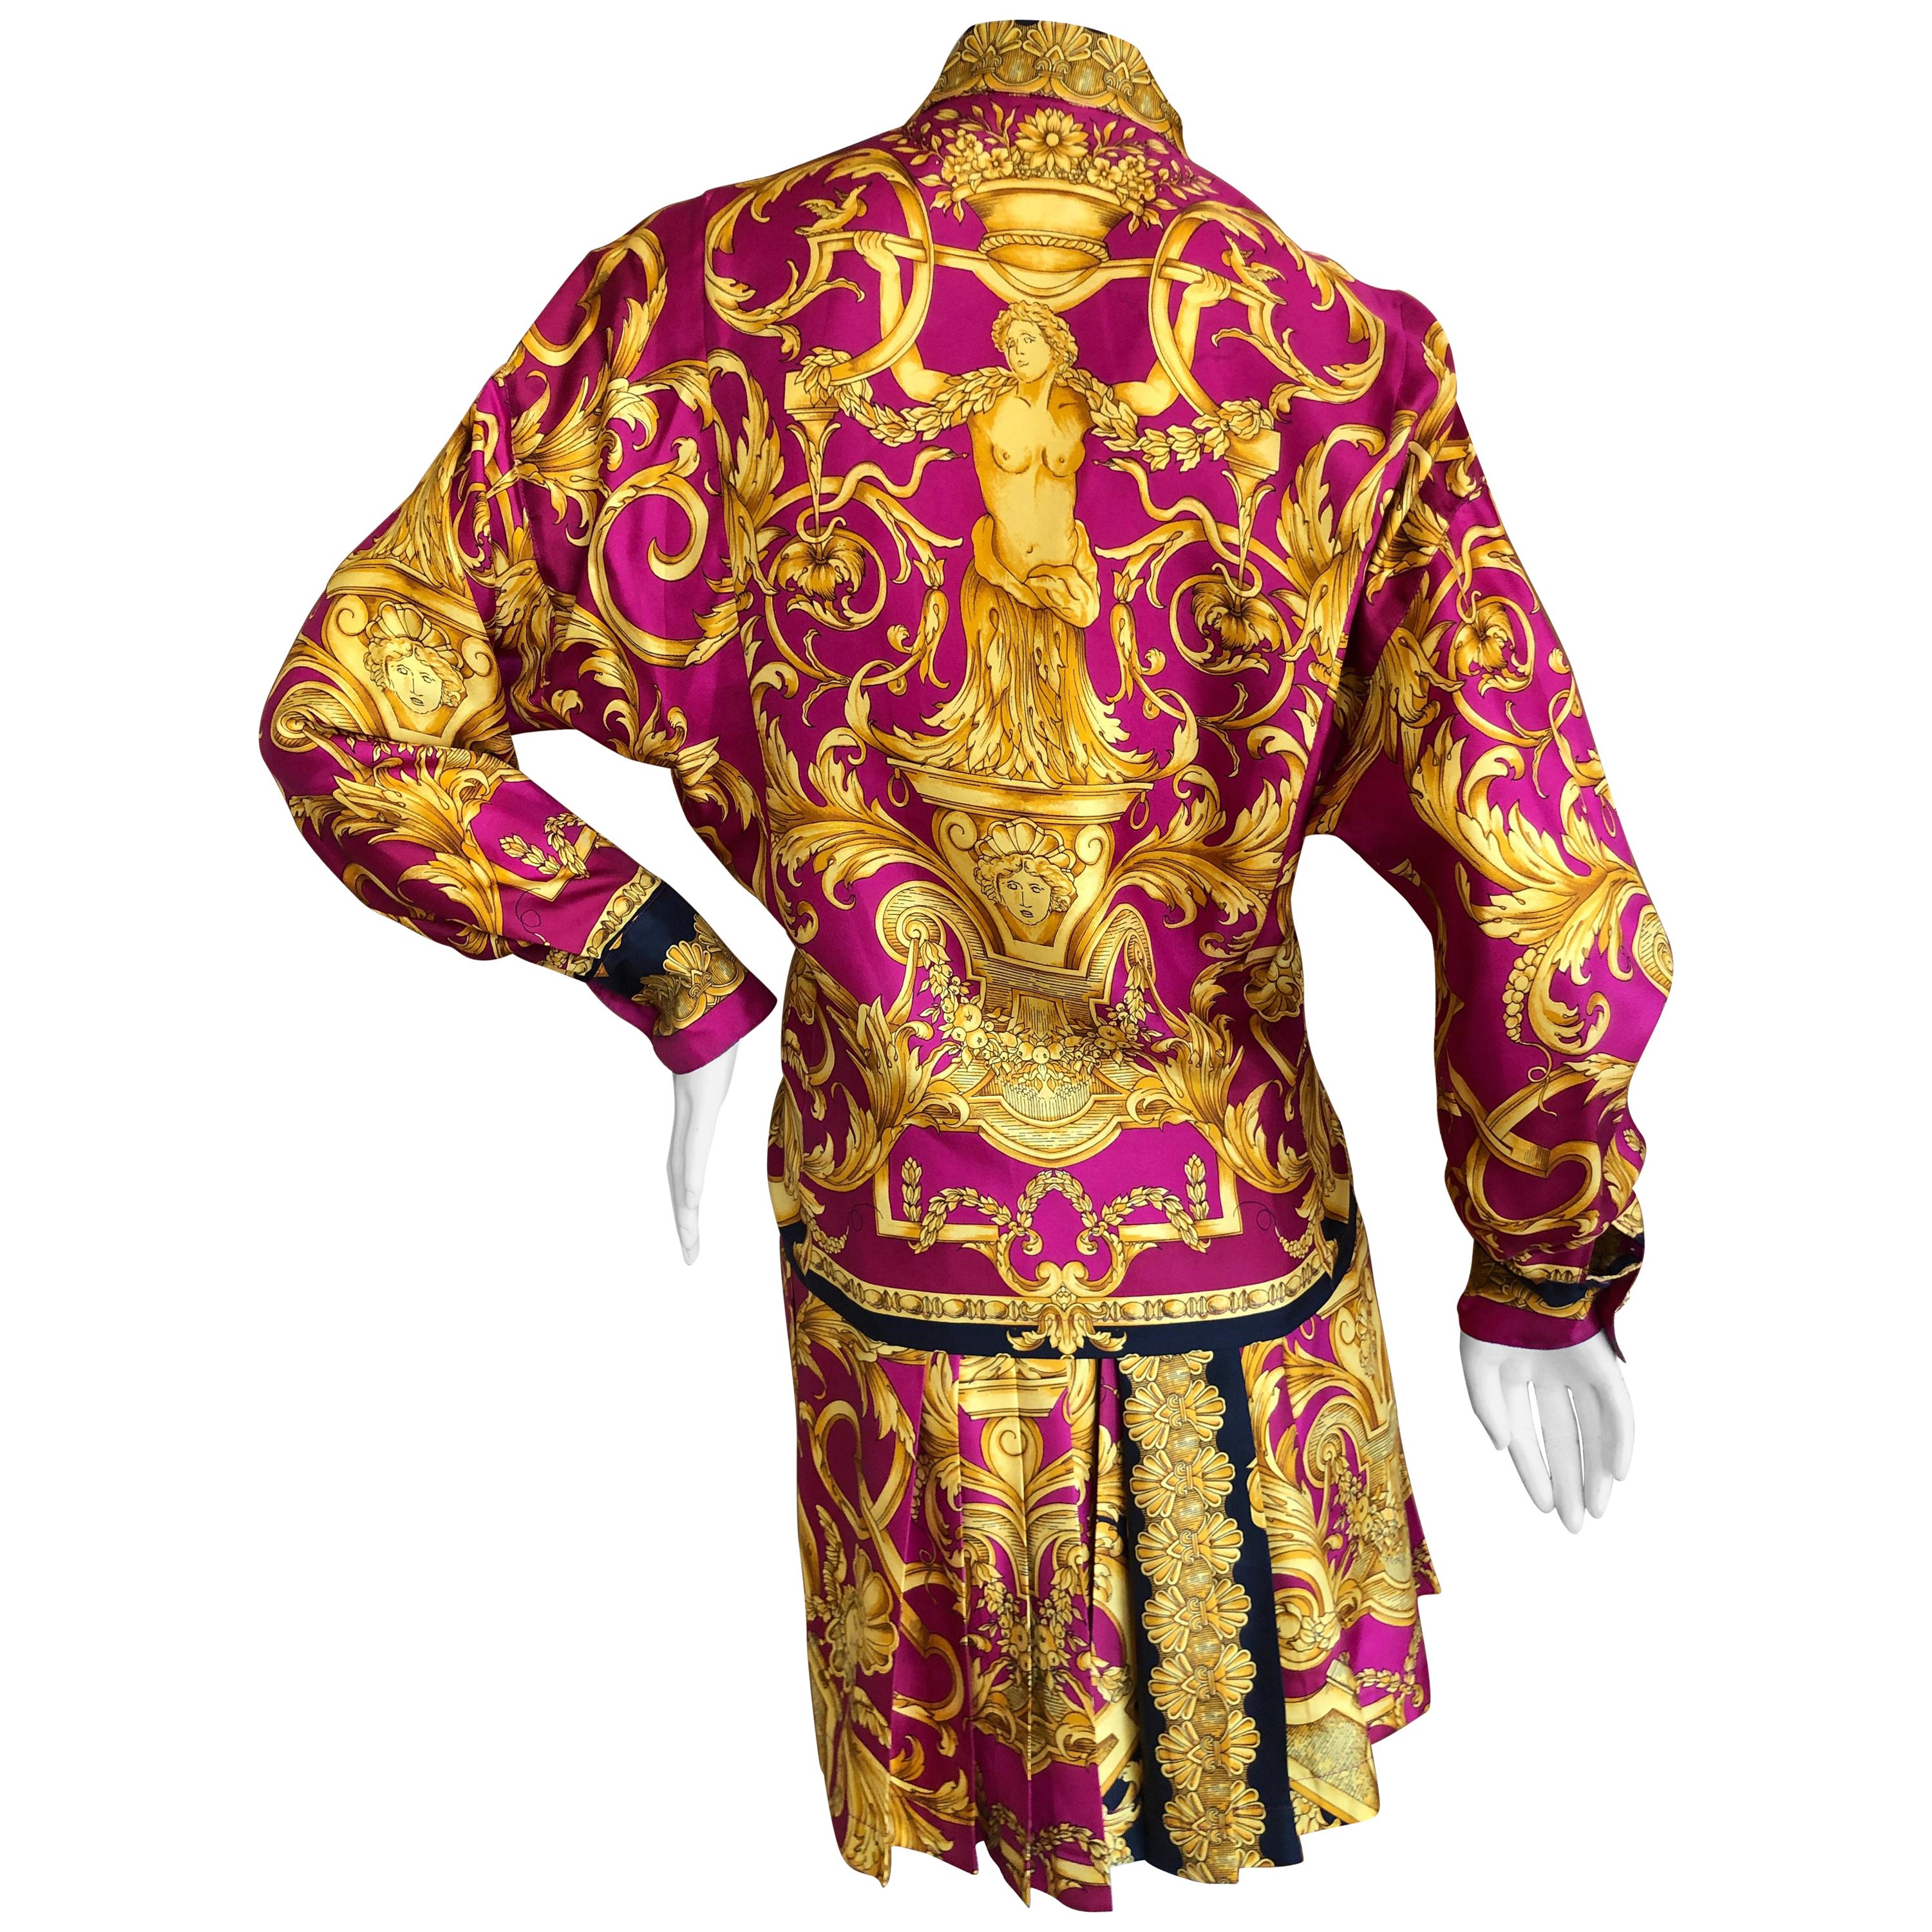 Gianni Versace 1987 Fuchsia and Gold Baroque Print Pleated Mini Skirt Suit For Sale